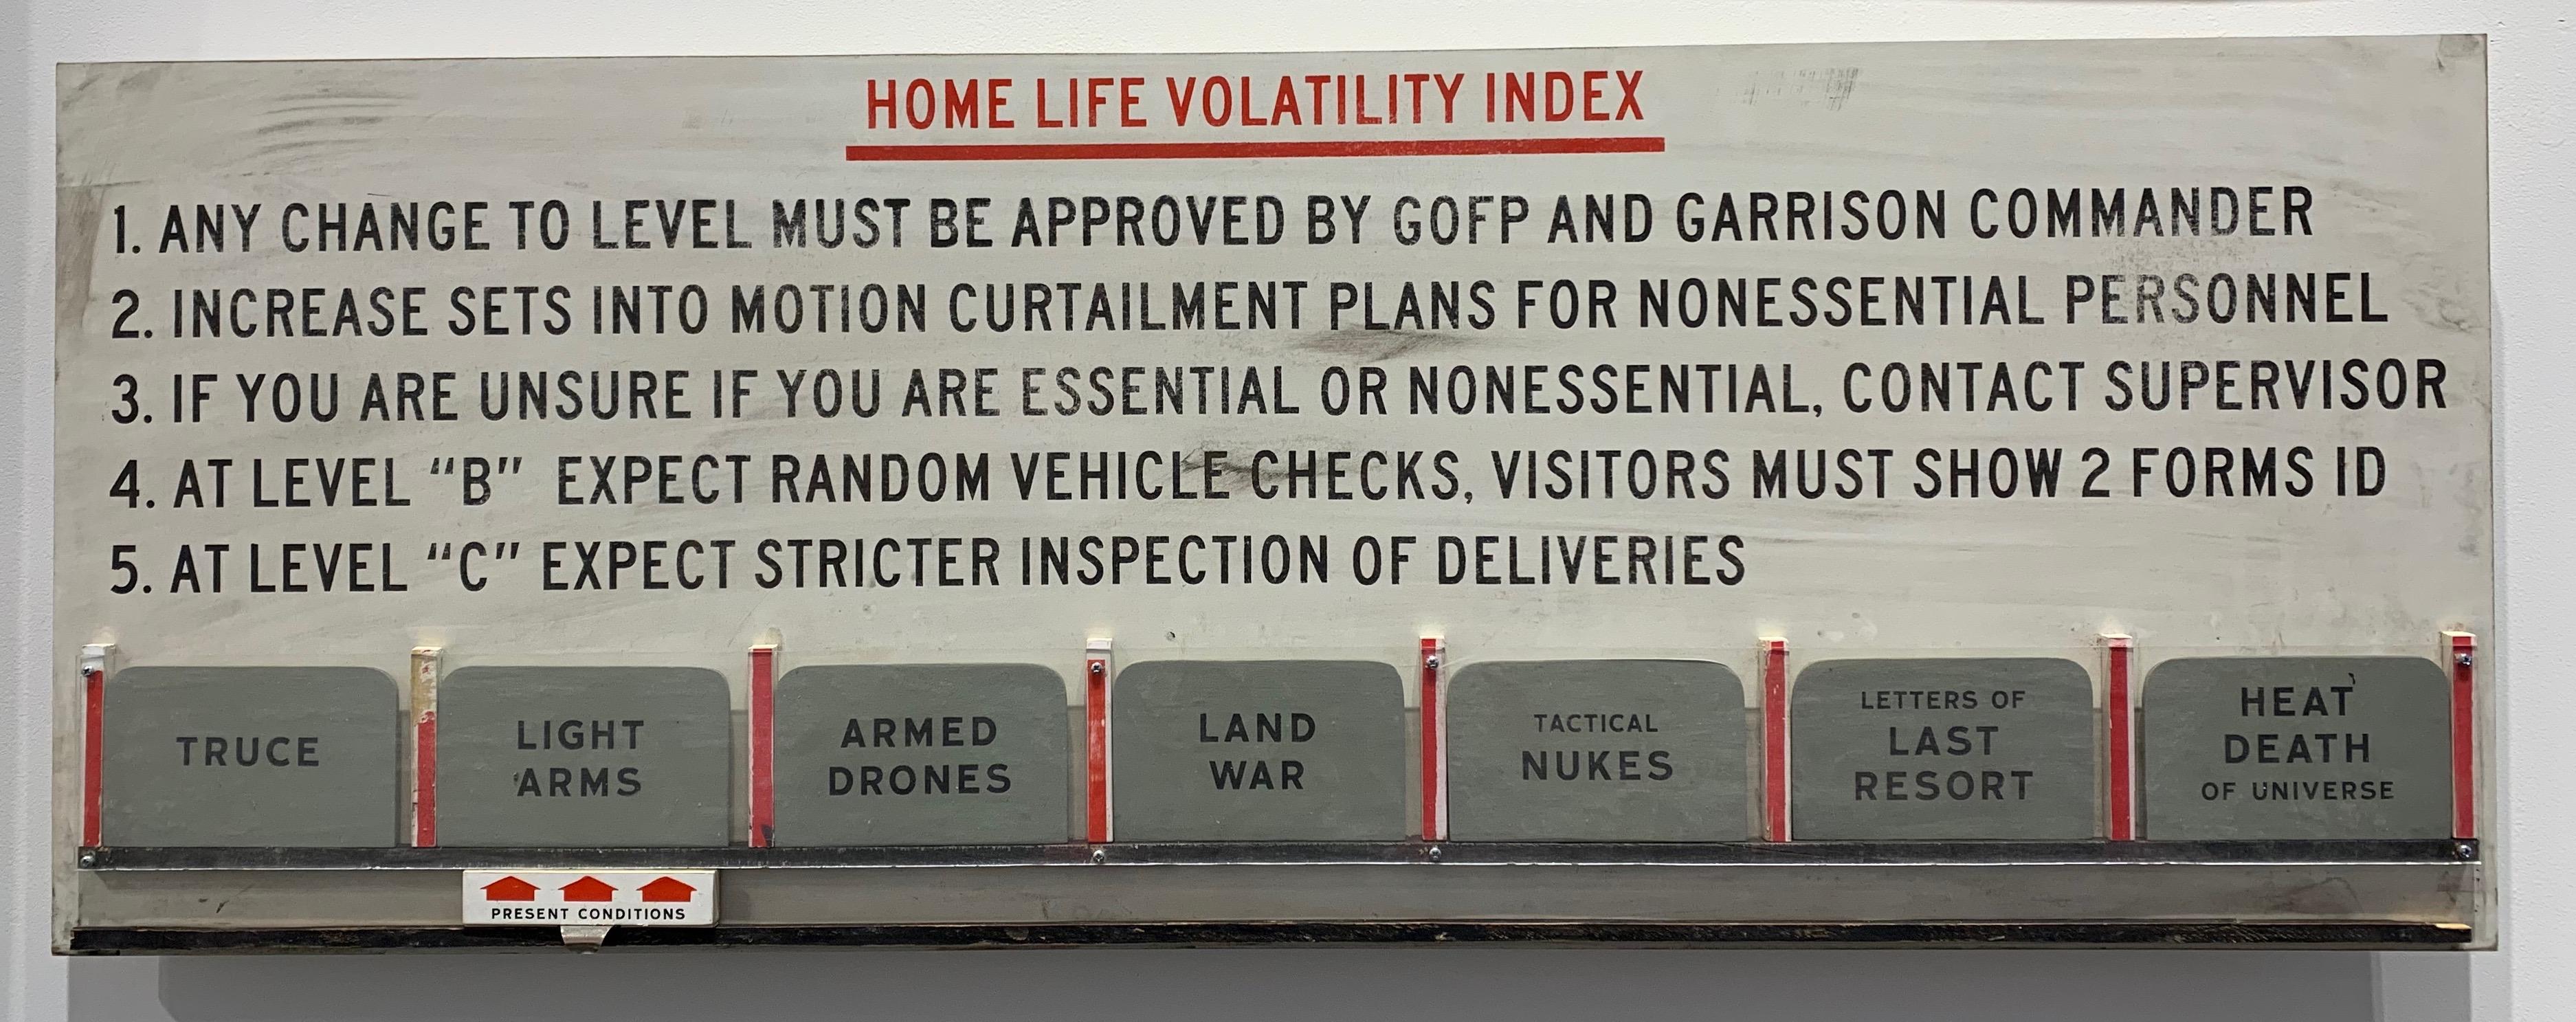 Home Life Volatility Index - Sculpture by Skylar Fein